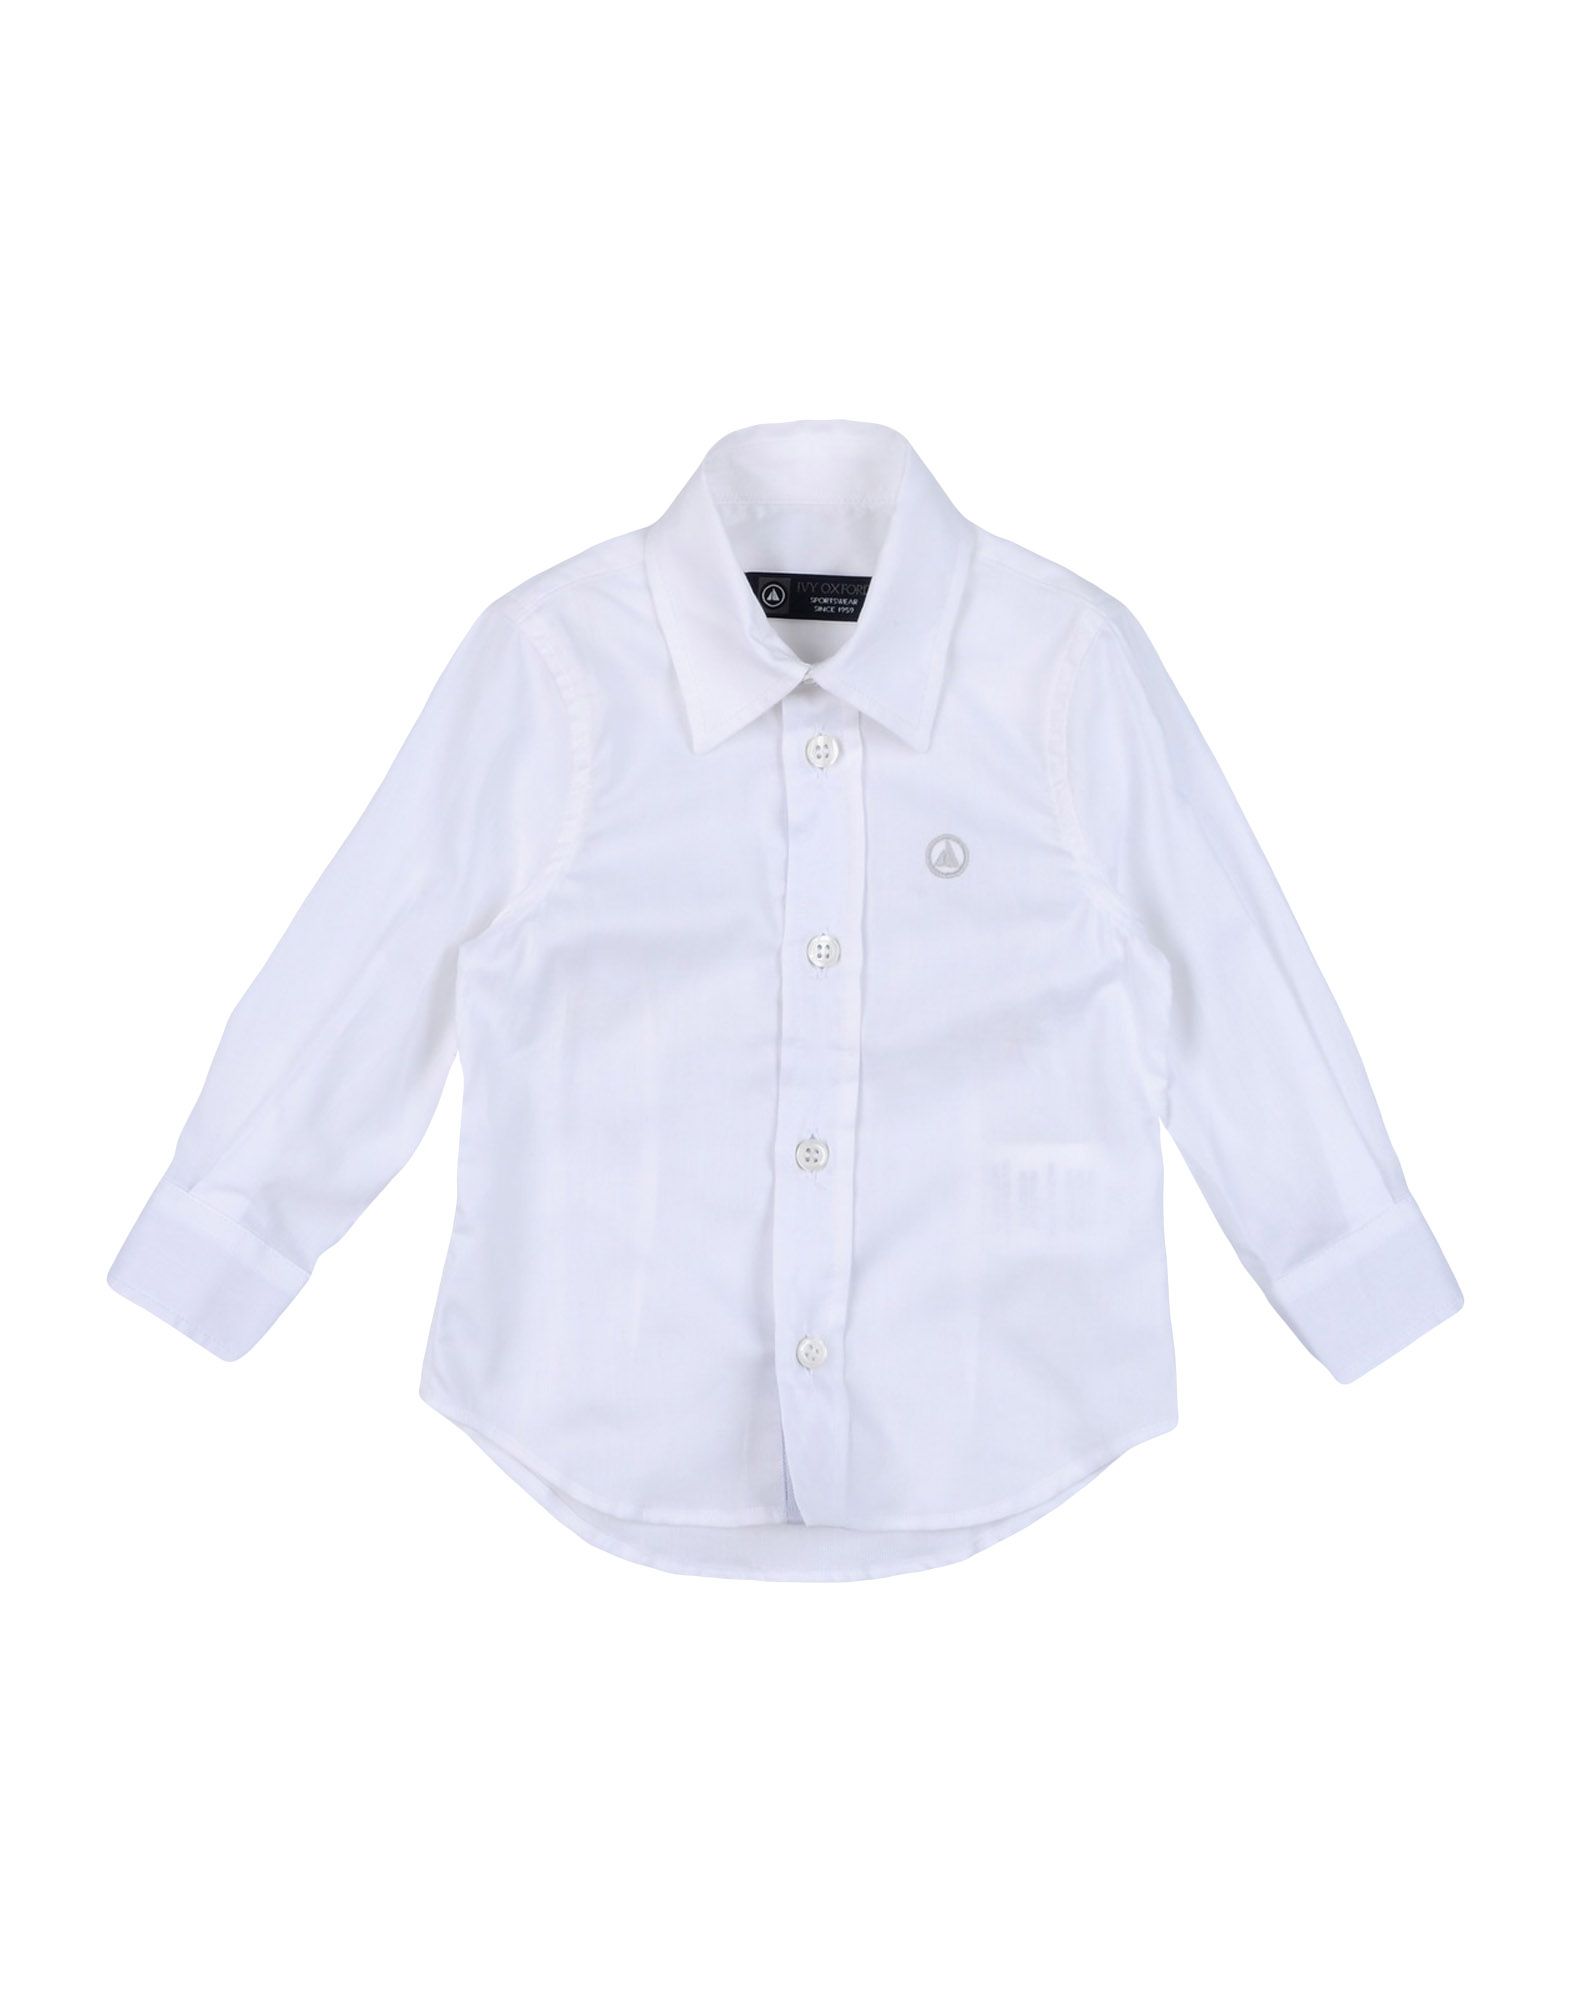 IVY OXFORD Solid color shirt